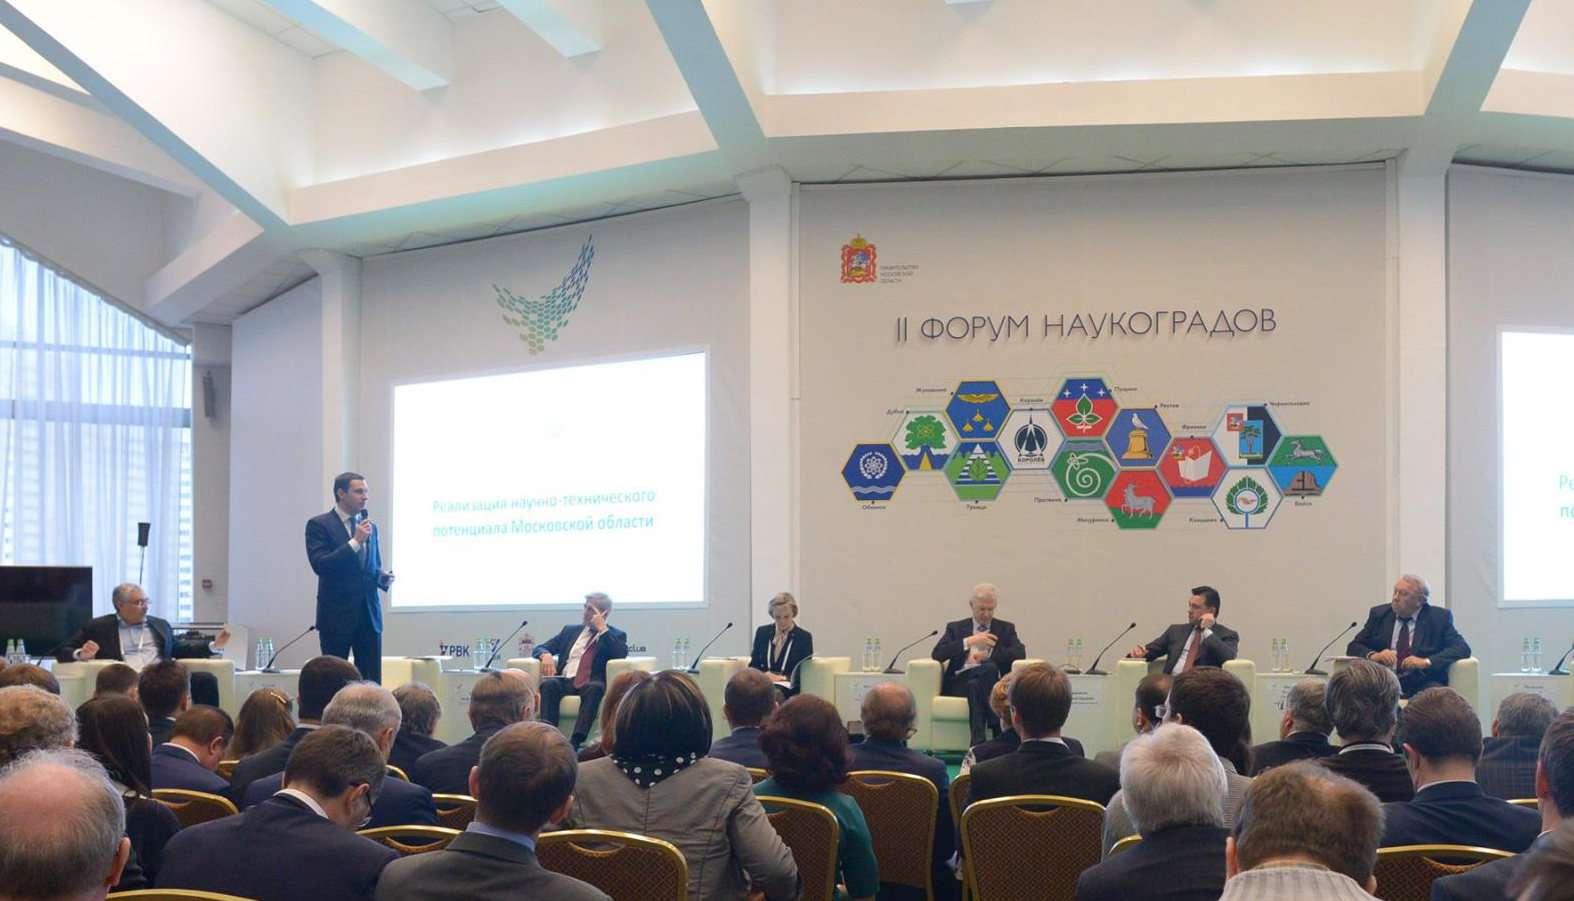 Inauguration of the forum in the House of Moscow Oblast Government